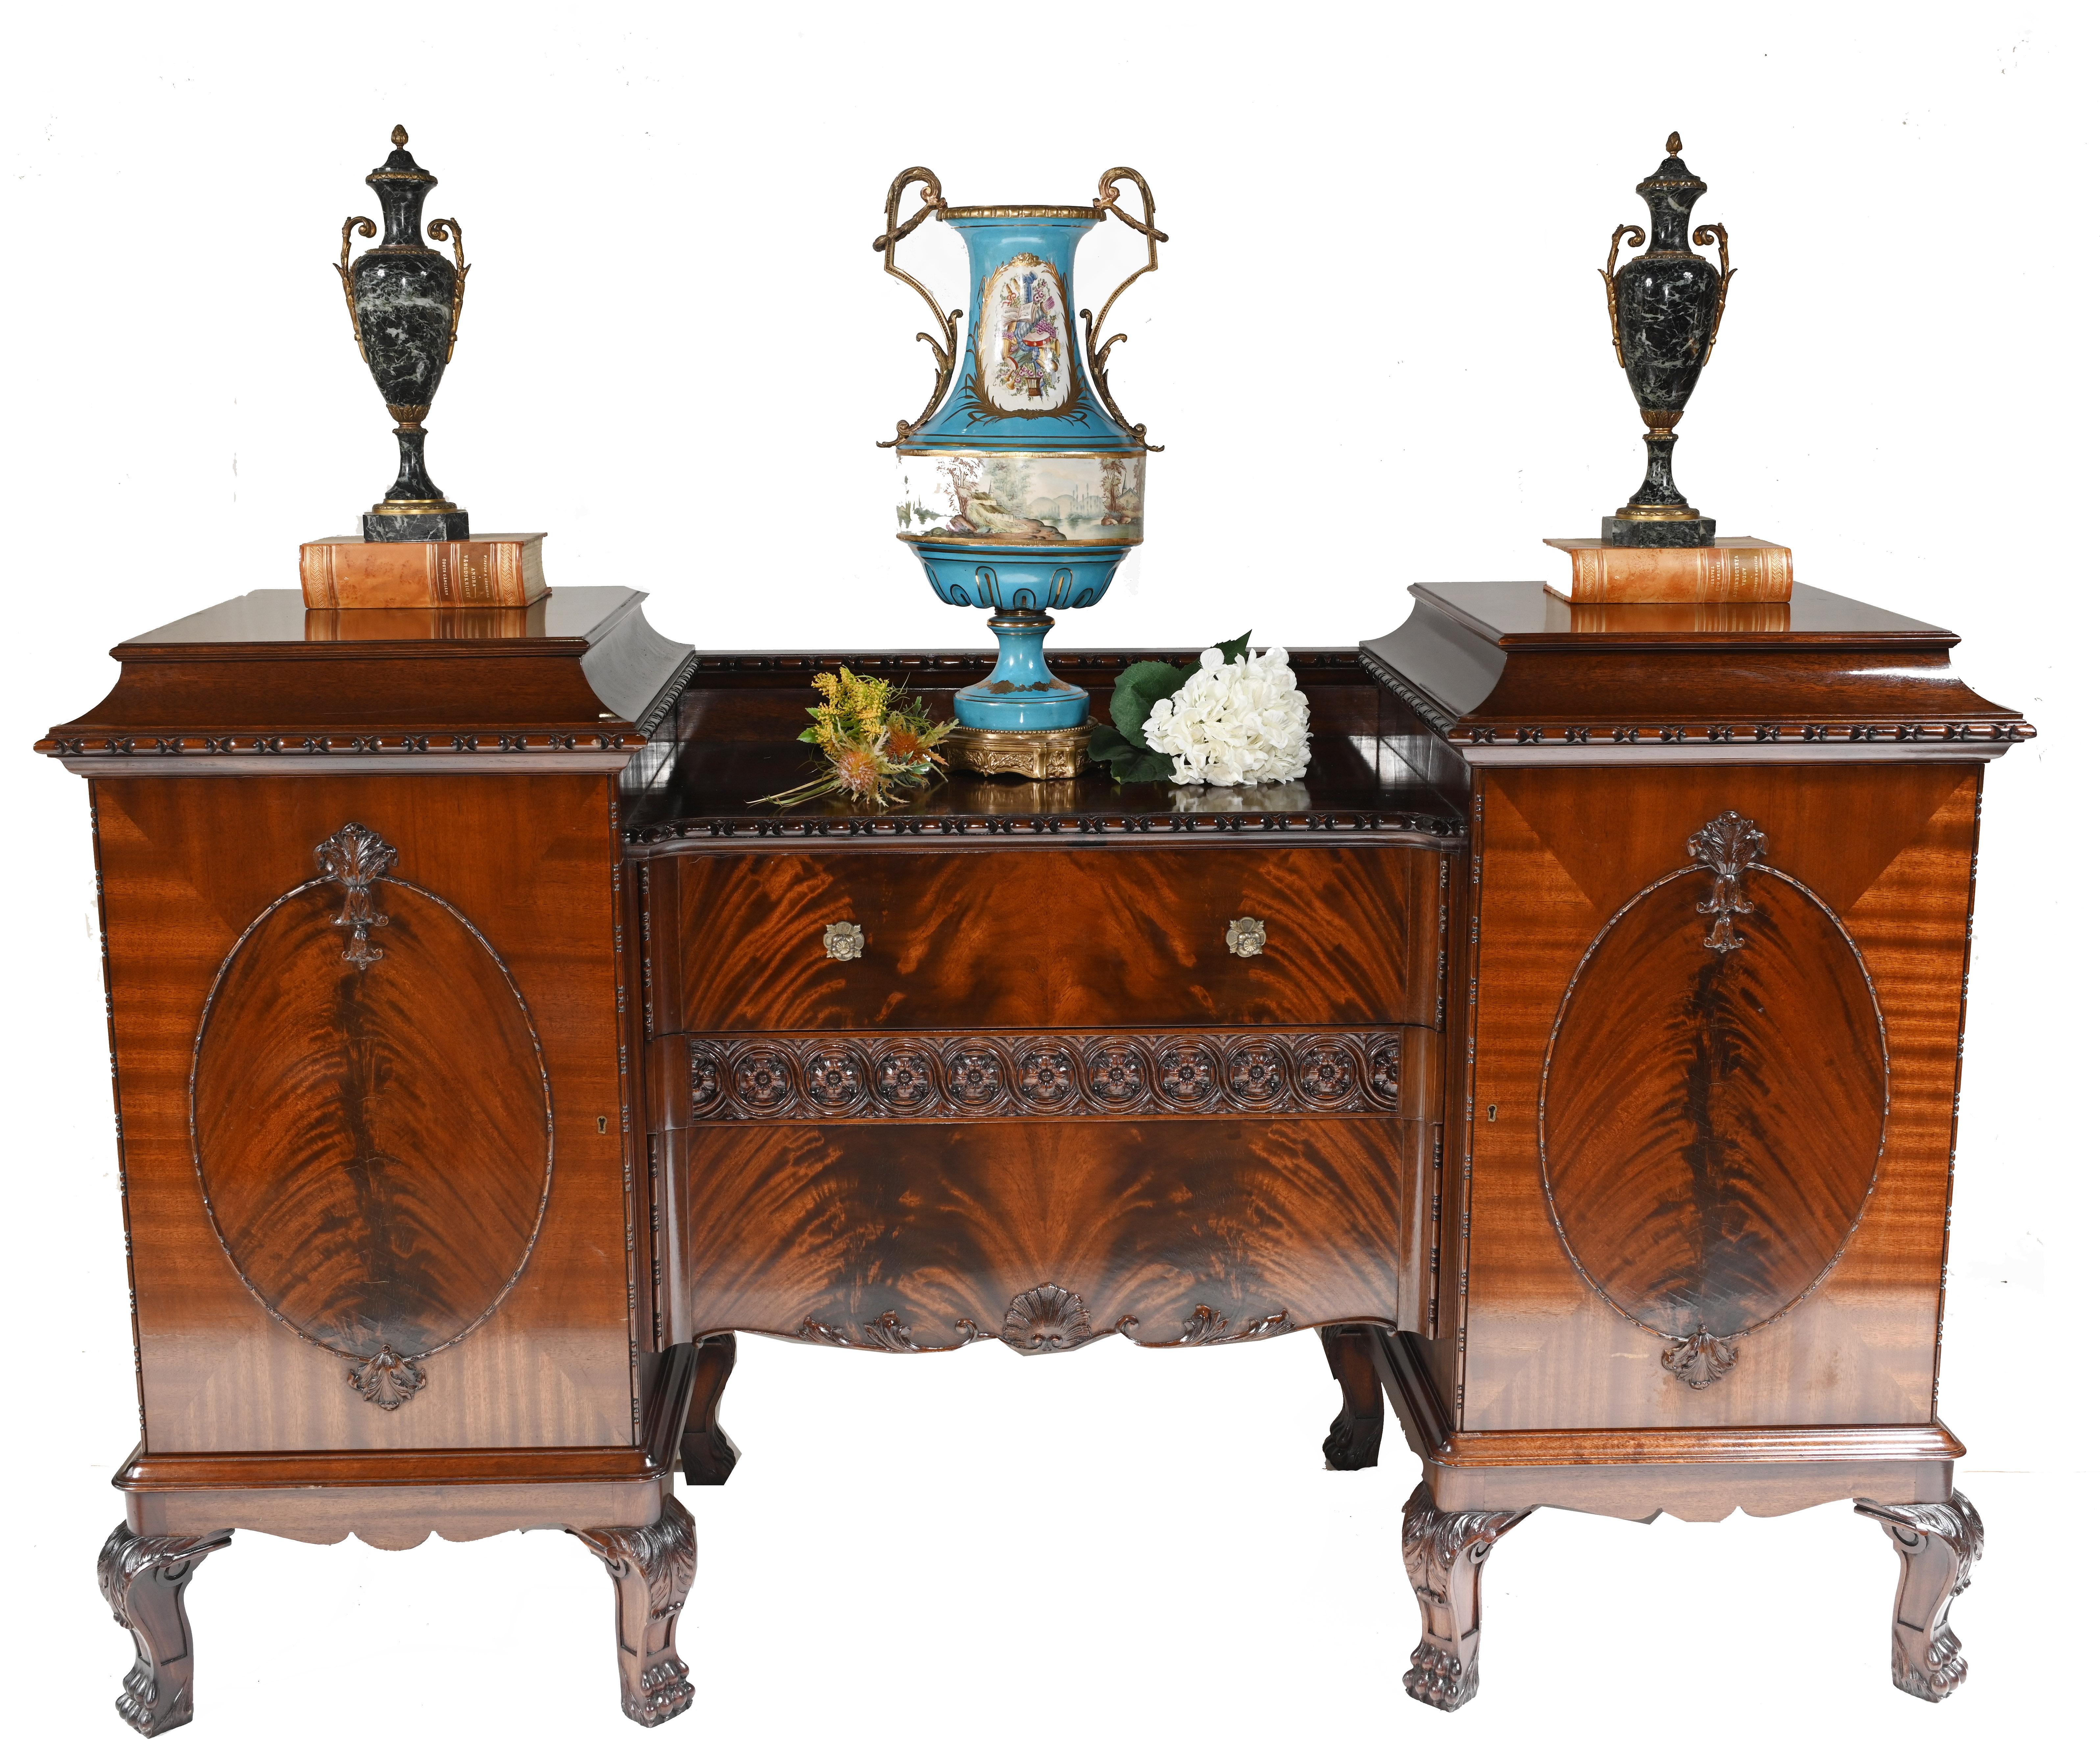 Wonderful antique sideboard in the Gillows manner
We date this piece to circa 1880 
Fine piece of furniture and lots of storage
Original knife drawer with green lining 
Hand carved motifs on all surfaces
Some of our items are in storage so